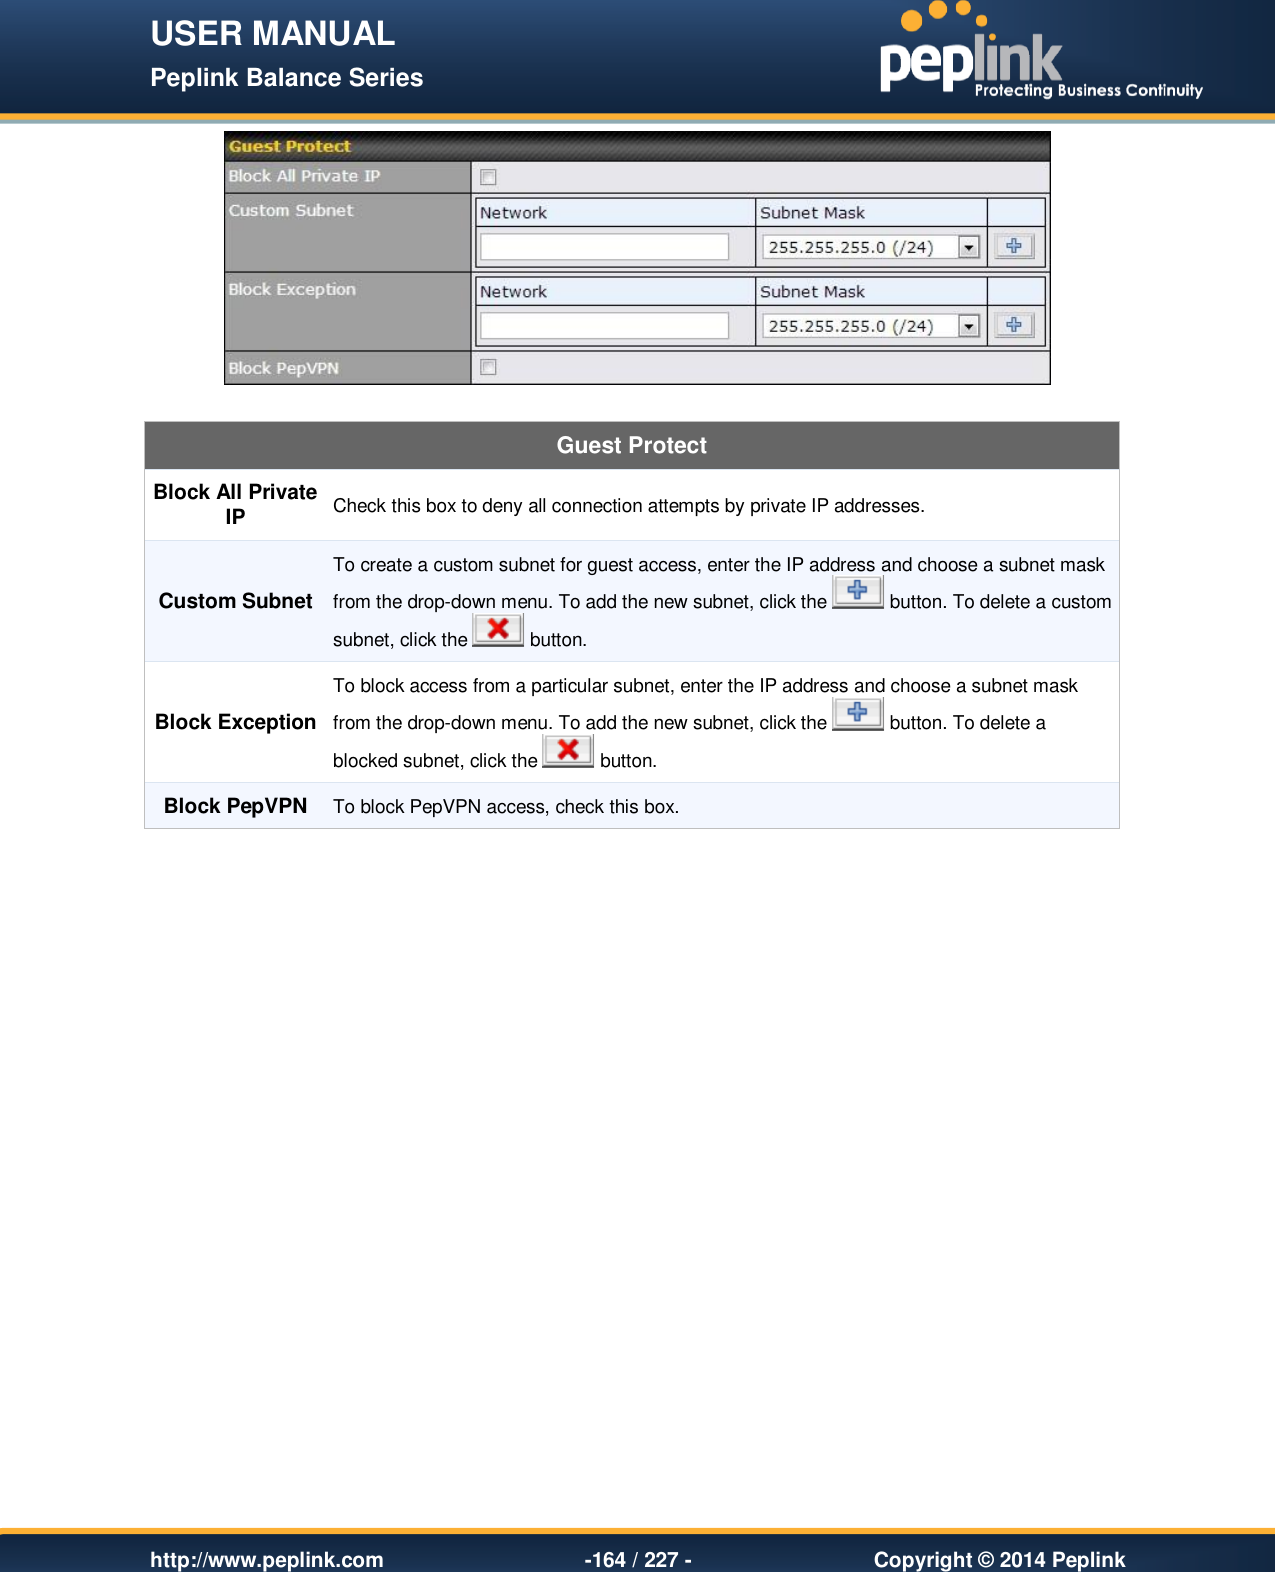 USER MANUAL Peplink Balance Series   http://www.peplink.com -164 / 227 -  Copyright © 2014 Peplink   Guest Protect Block All Private IP Check this box to deny all connection attempts by private IP addresses. Custom Subnet To create a custom subnet for guest access, enter the IP address and choose a subnet mask from the drop-down menu. To add the new subnet, click the   button. To delete a custom subnet, click the   button. Block Exception To block access from a particular subnet, enter the IP address and choose a subnet mask from the drop-down menu. To add the new subnet, click the   button. To delete a blocked subnet, click the   button. Block PepVPN To block PepVPN access, check this box.     